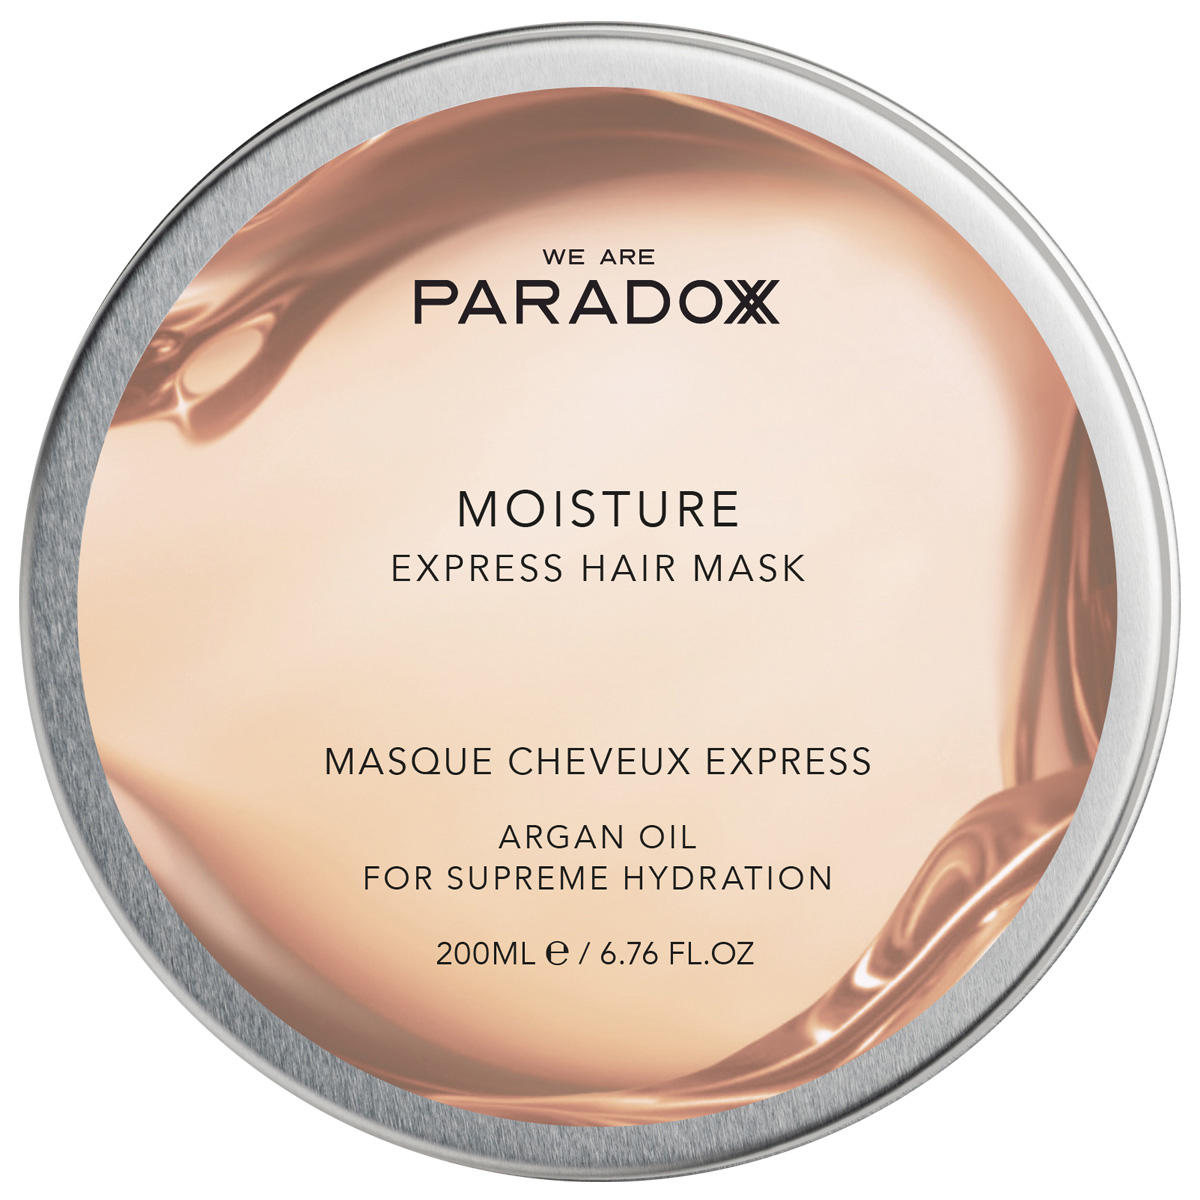 WE ARE PARADOXX MOISTURE EXPRESS HAIR MASK 200 ml - 1